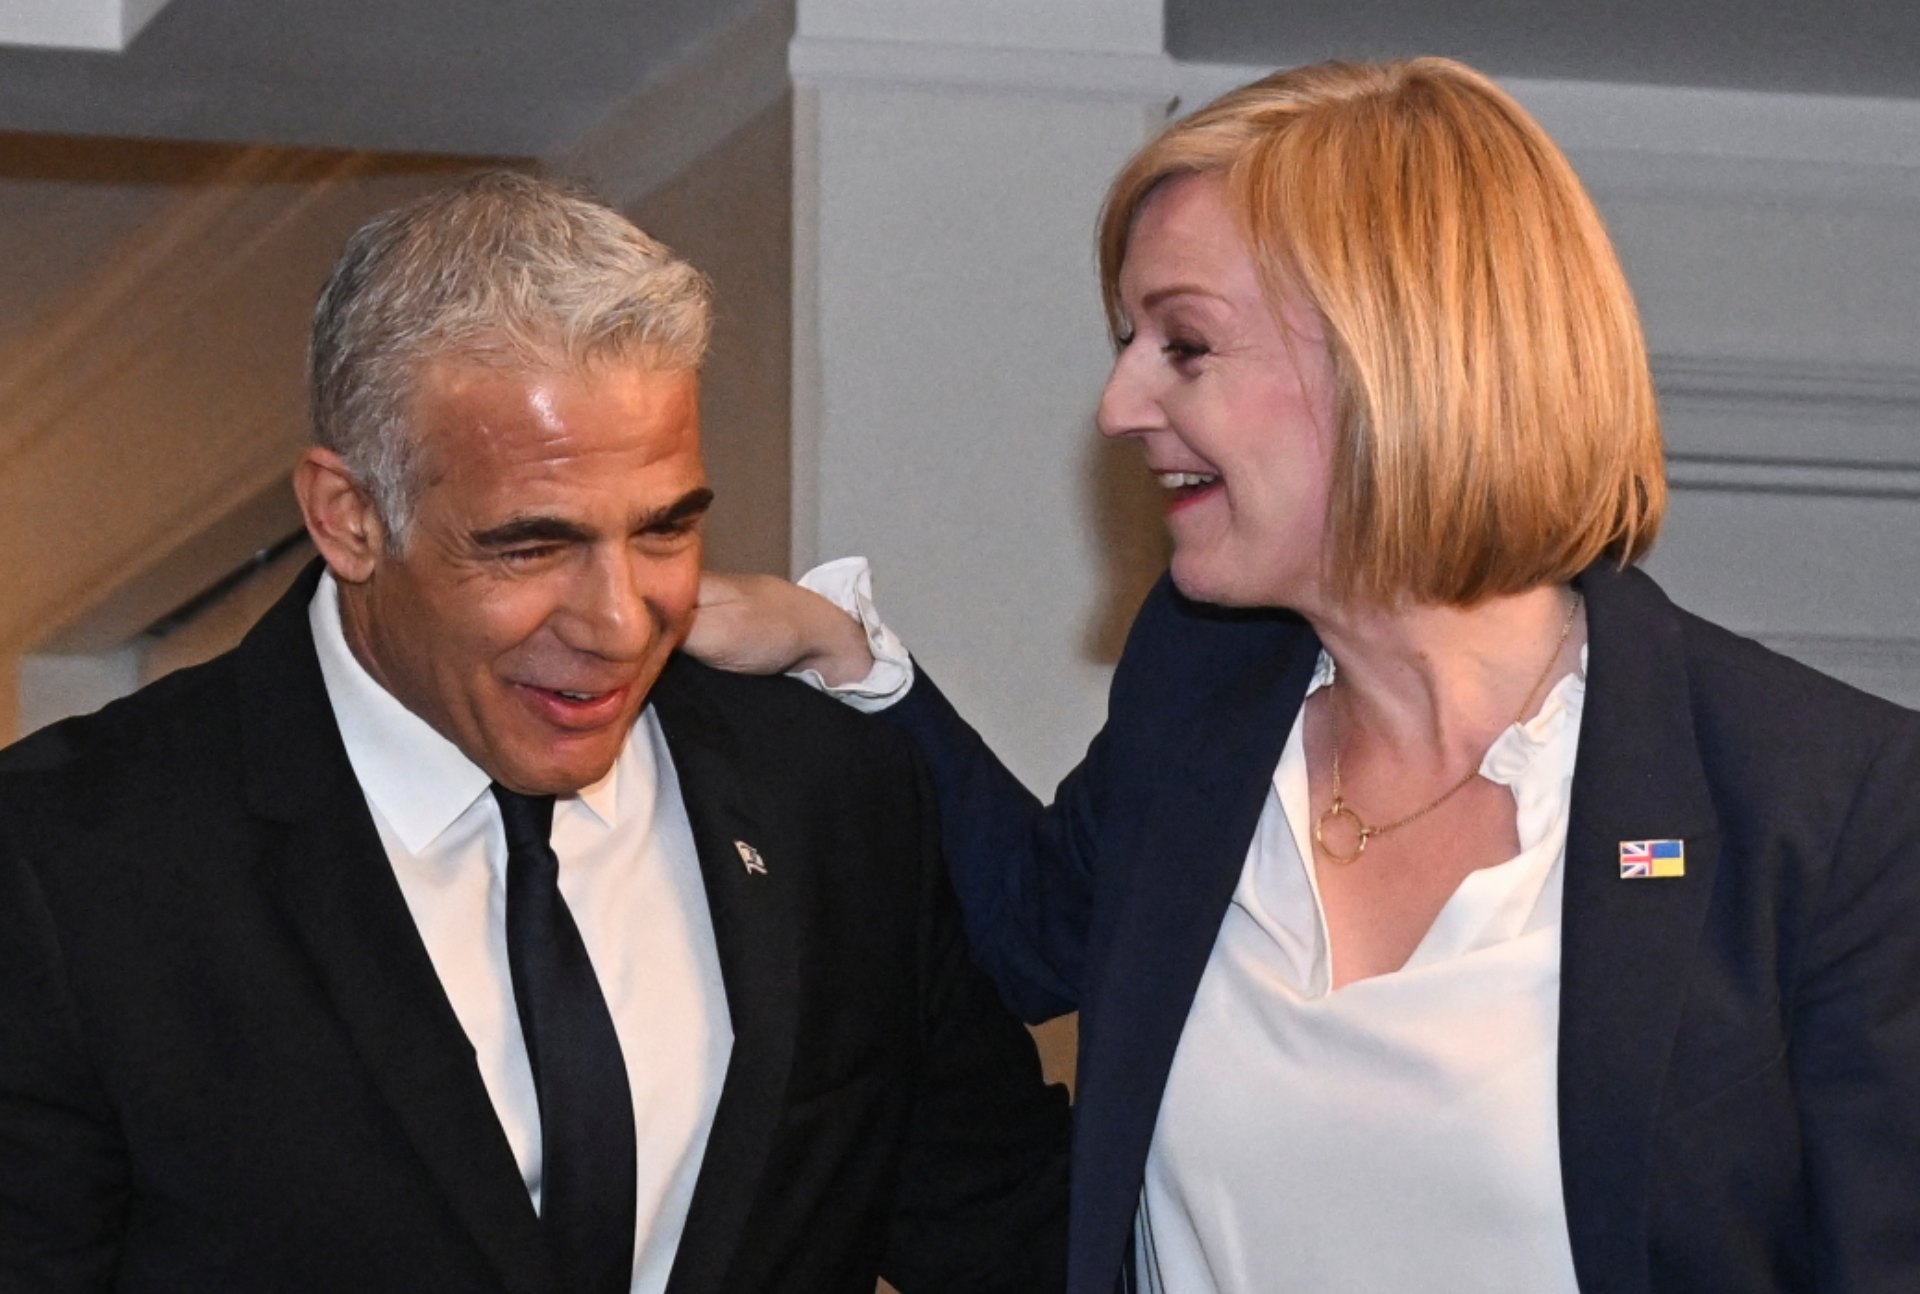 Israeli Prime Minister Yair Lapid, left, with British counterpart Liz Truss at the UN General Assembly in New York in September 2022 (Reuters)